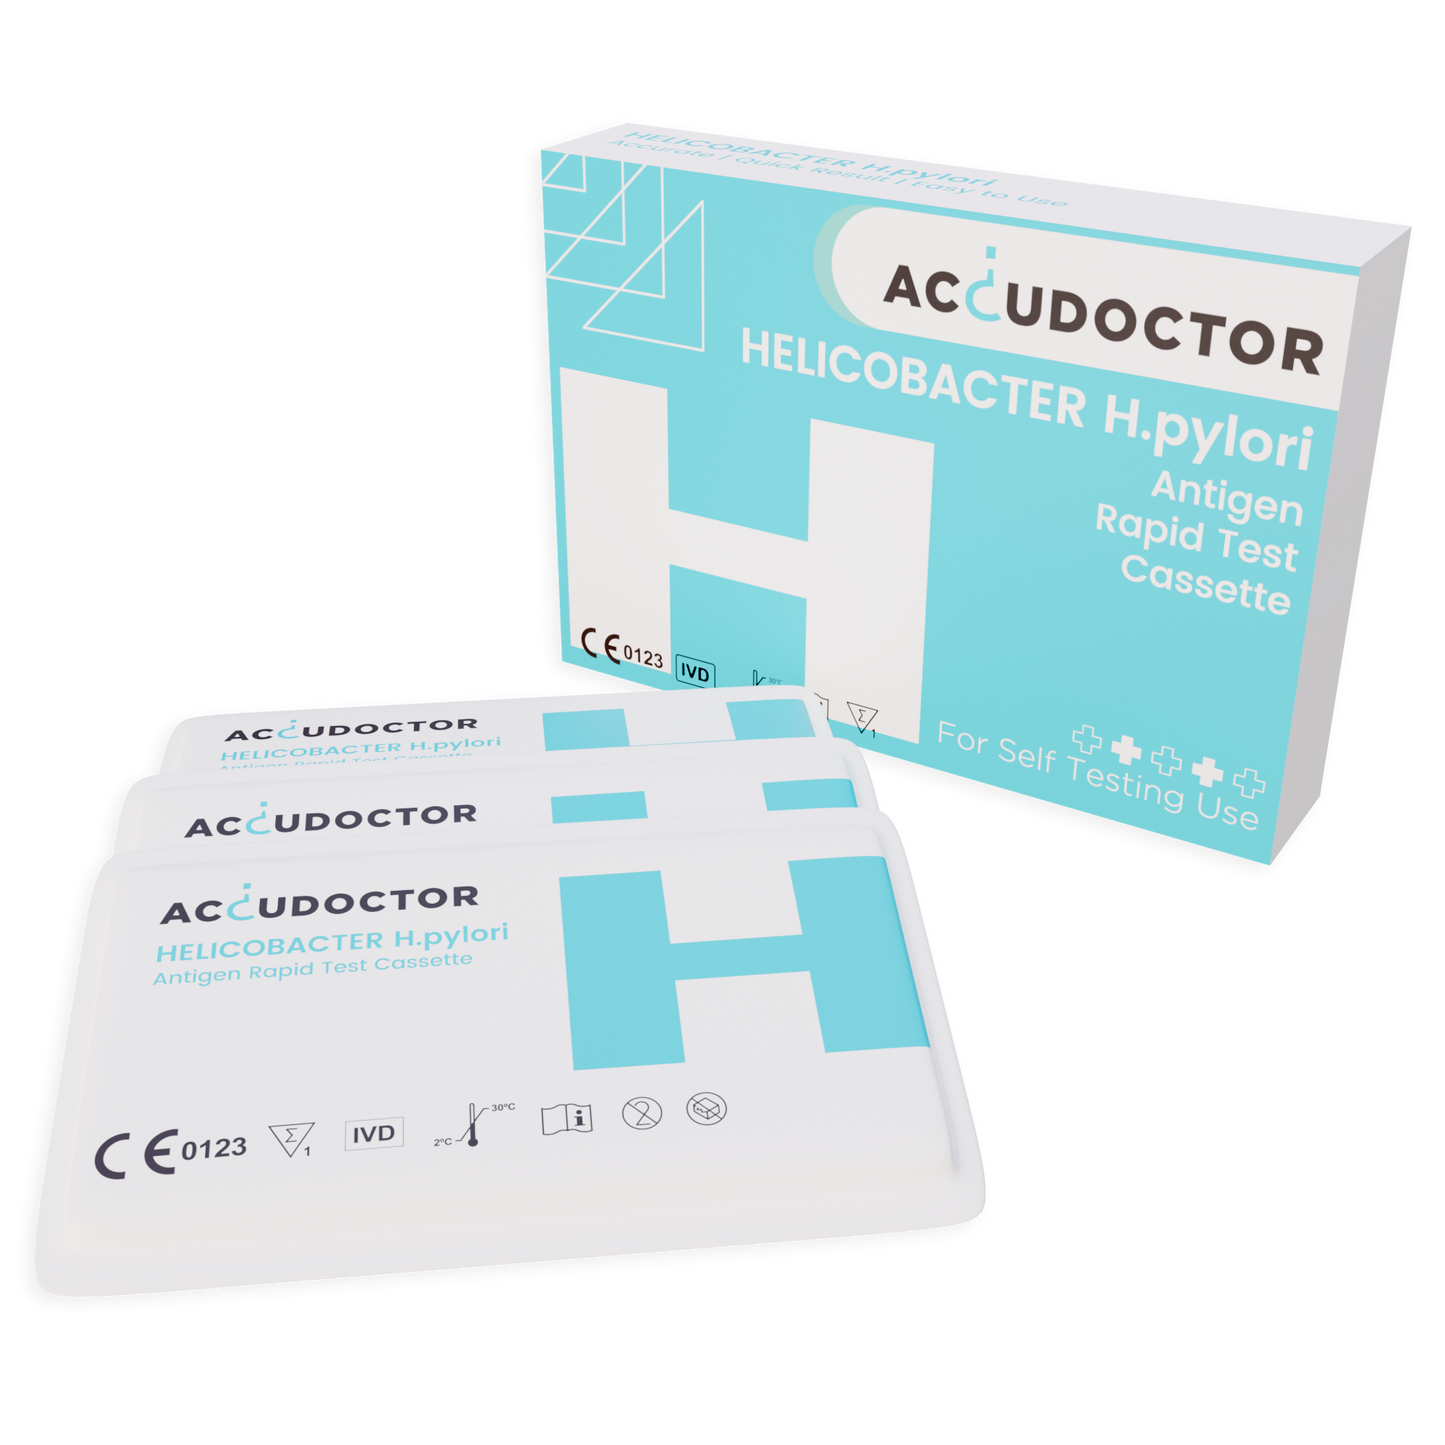 Accudoctor Helicobacter Pylori Test